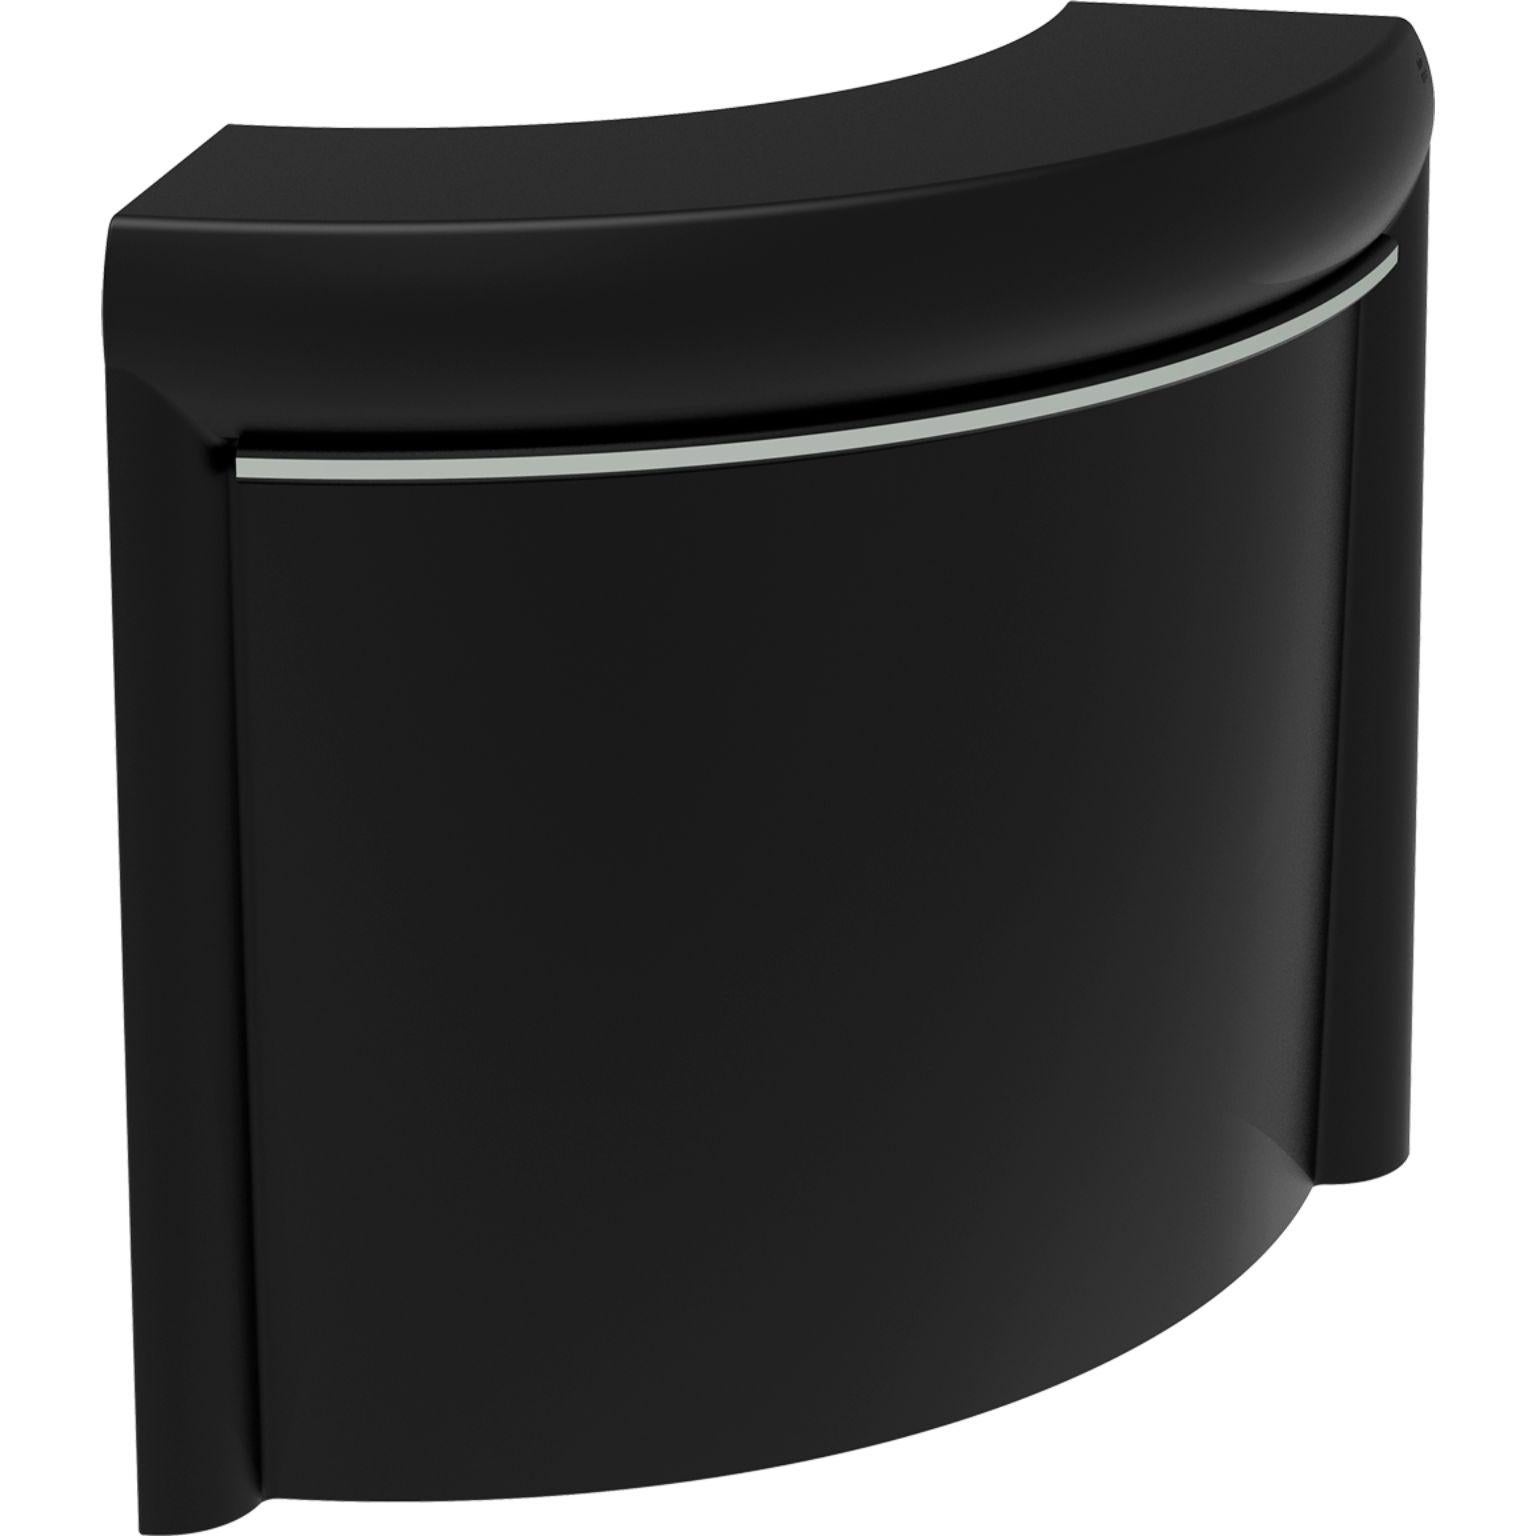 Curved black lacquered classe bar by MOWEE
Dimensions: D100 x W100 x H115 cm
Material: Polyethylene and stainless steel.
Weight: 31 kg
Also available in different colors, wheel kit optional, bar union kit optional, LED Lighting optional.